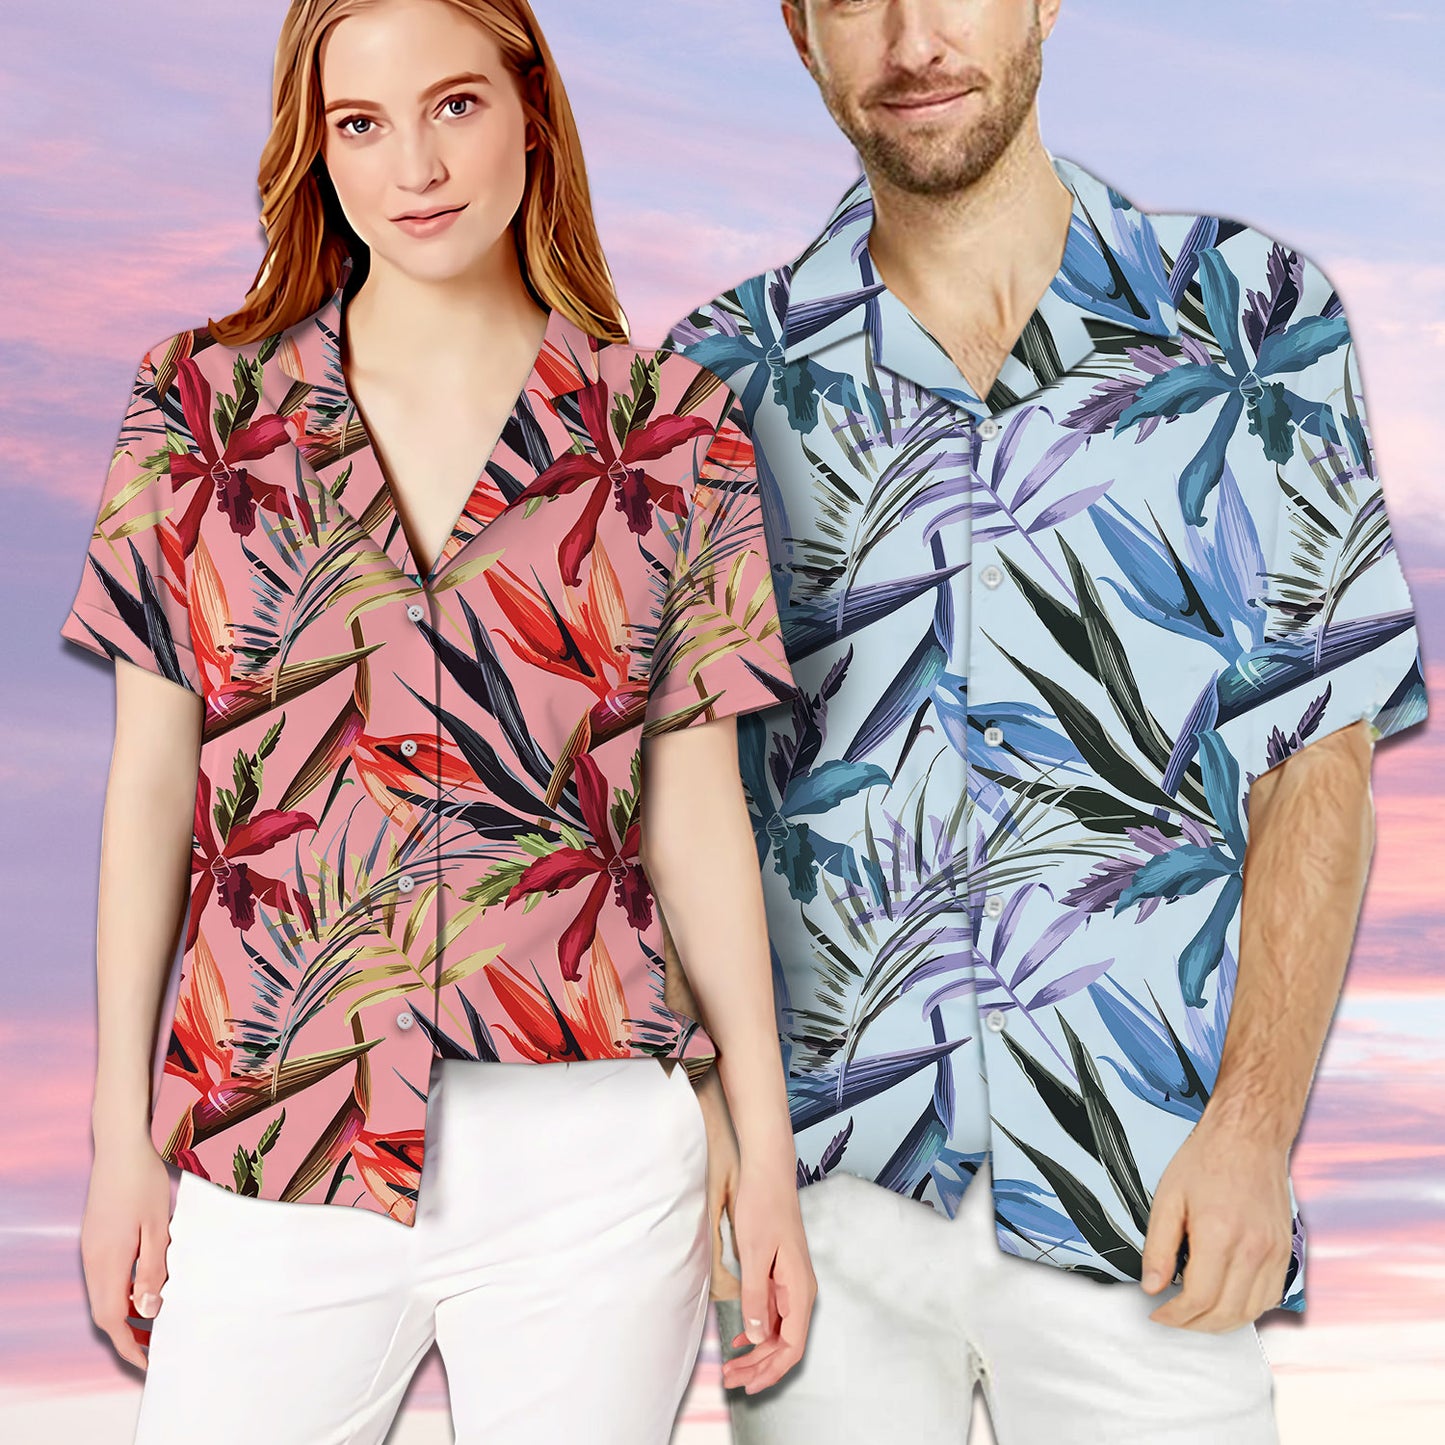 He Sees All My Light She Accepted All My Dark Matching Hawaiian Shirt Personalizedwitch For Couple